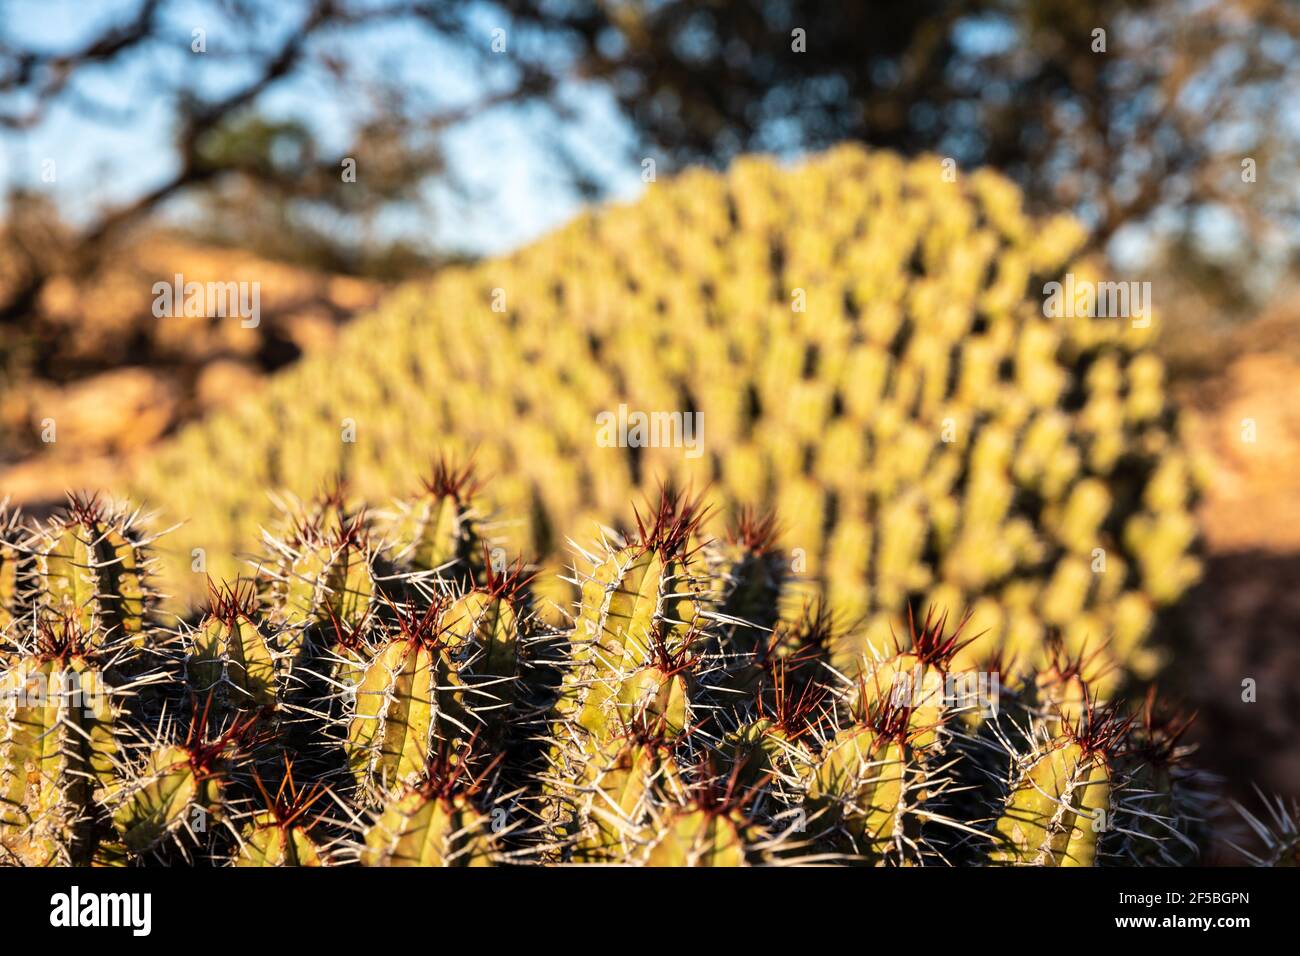 low angel view close-up of cactus thorns in bright sunlight, Morocco Stock Photo